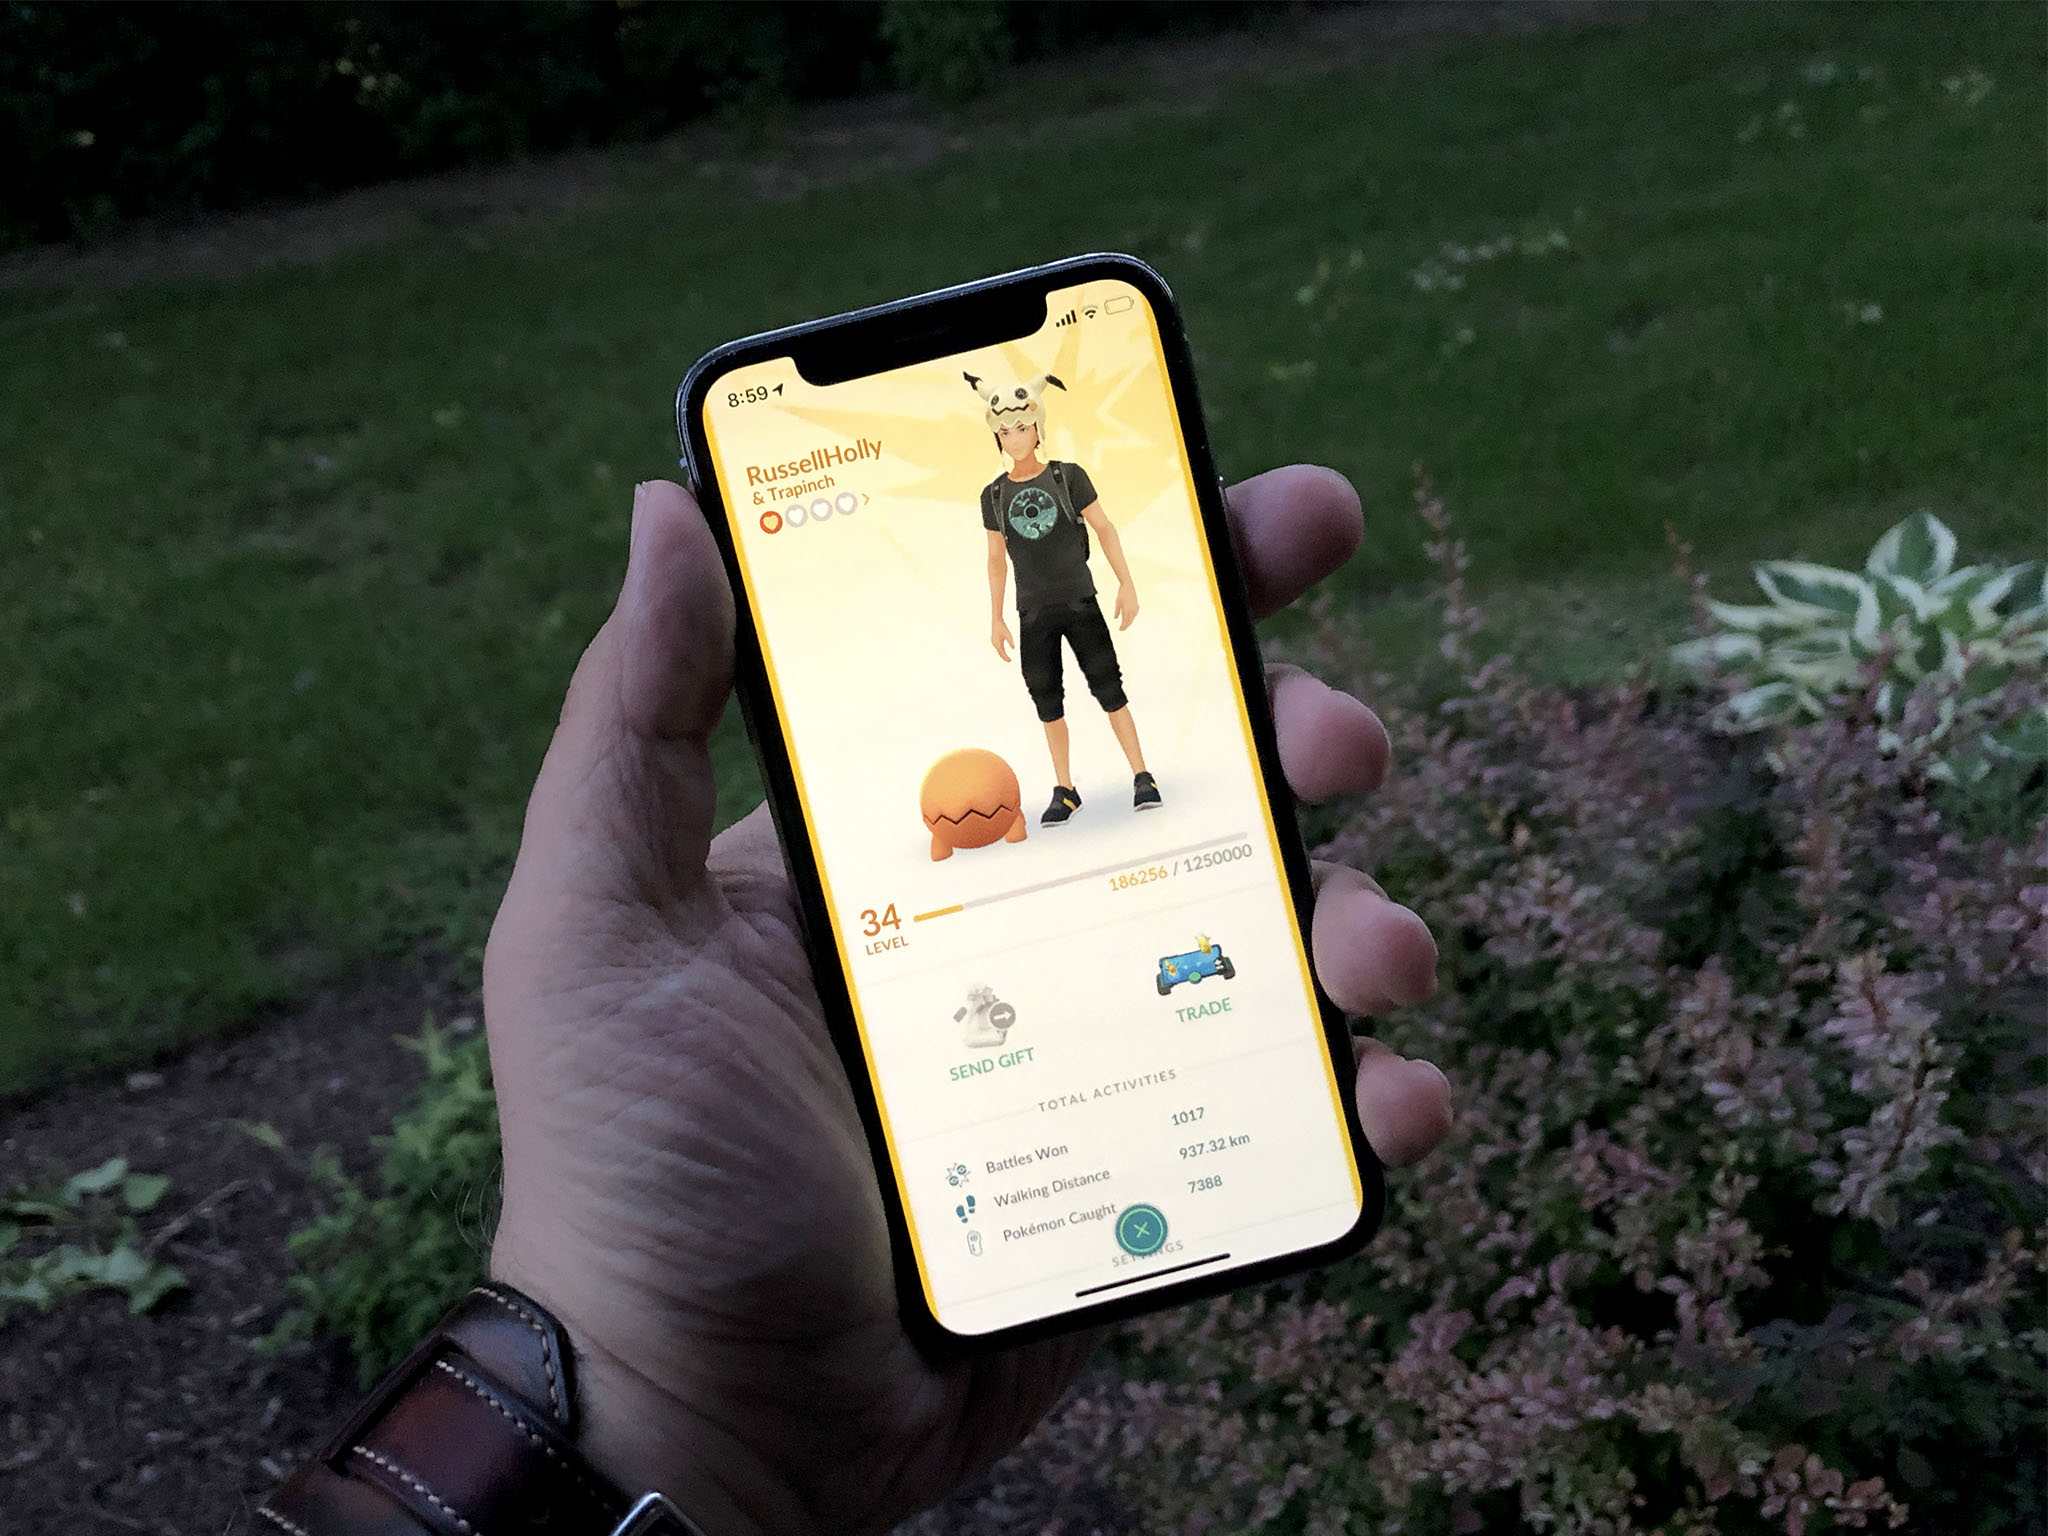 2023] Pokémon GO Friend Code: What Is It, and How It Works